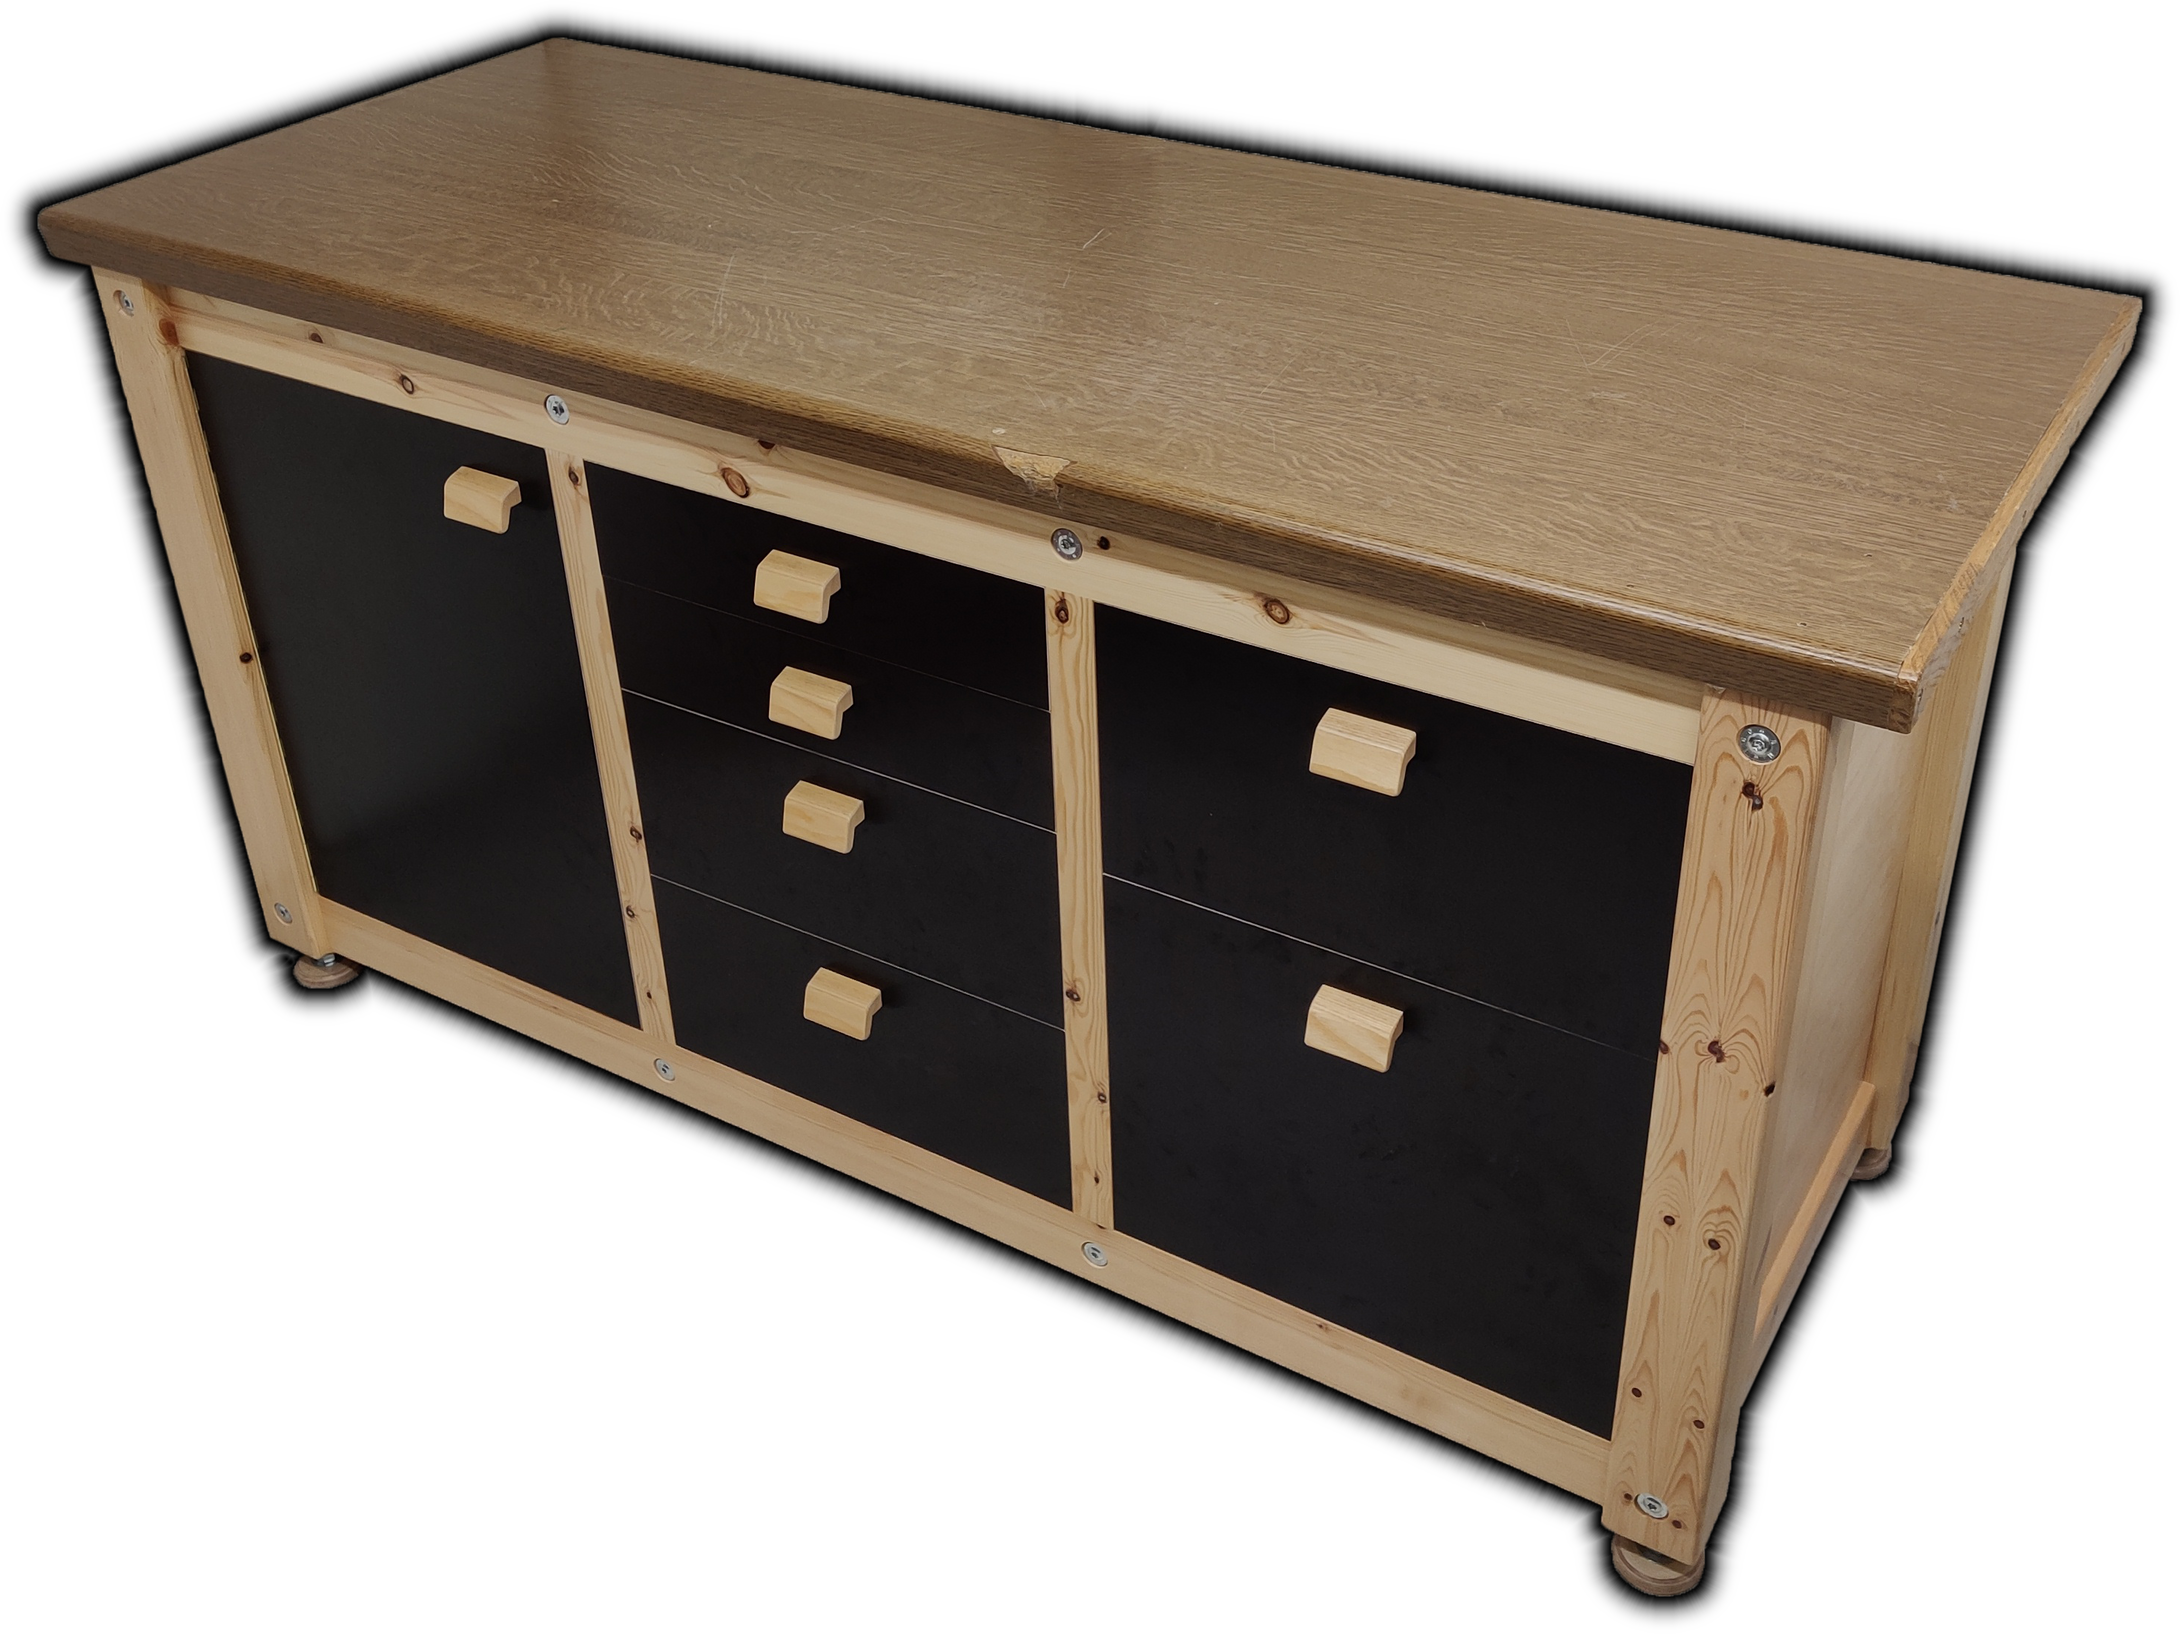 Disassemblable workbench plans